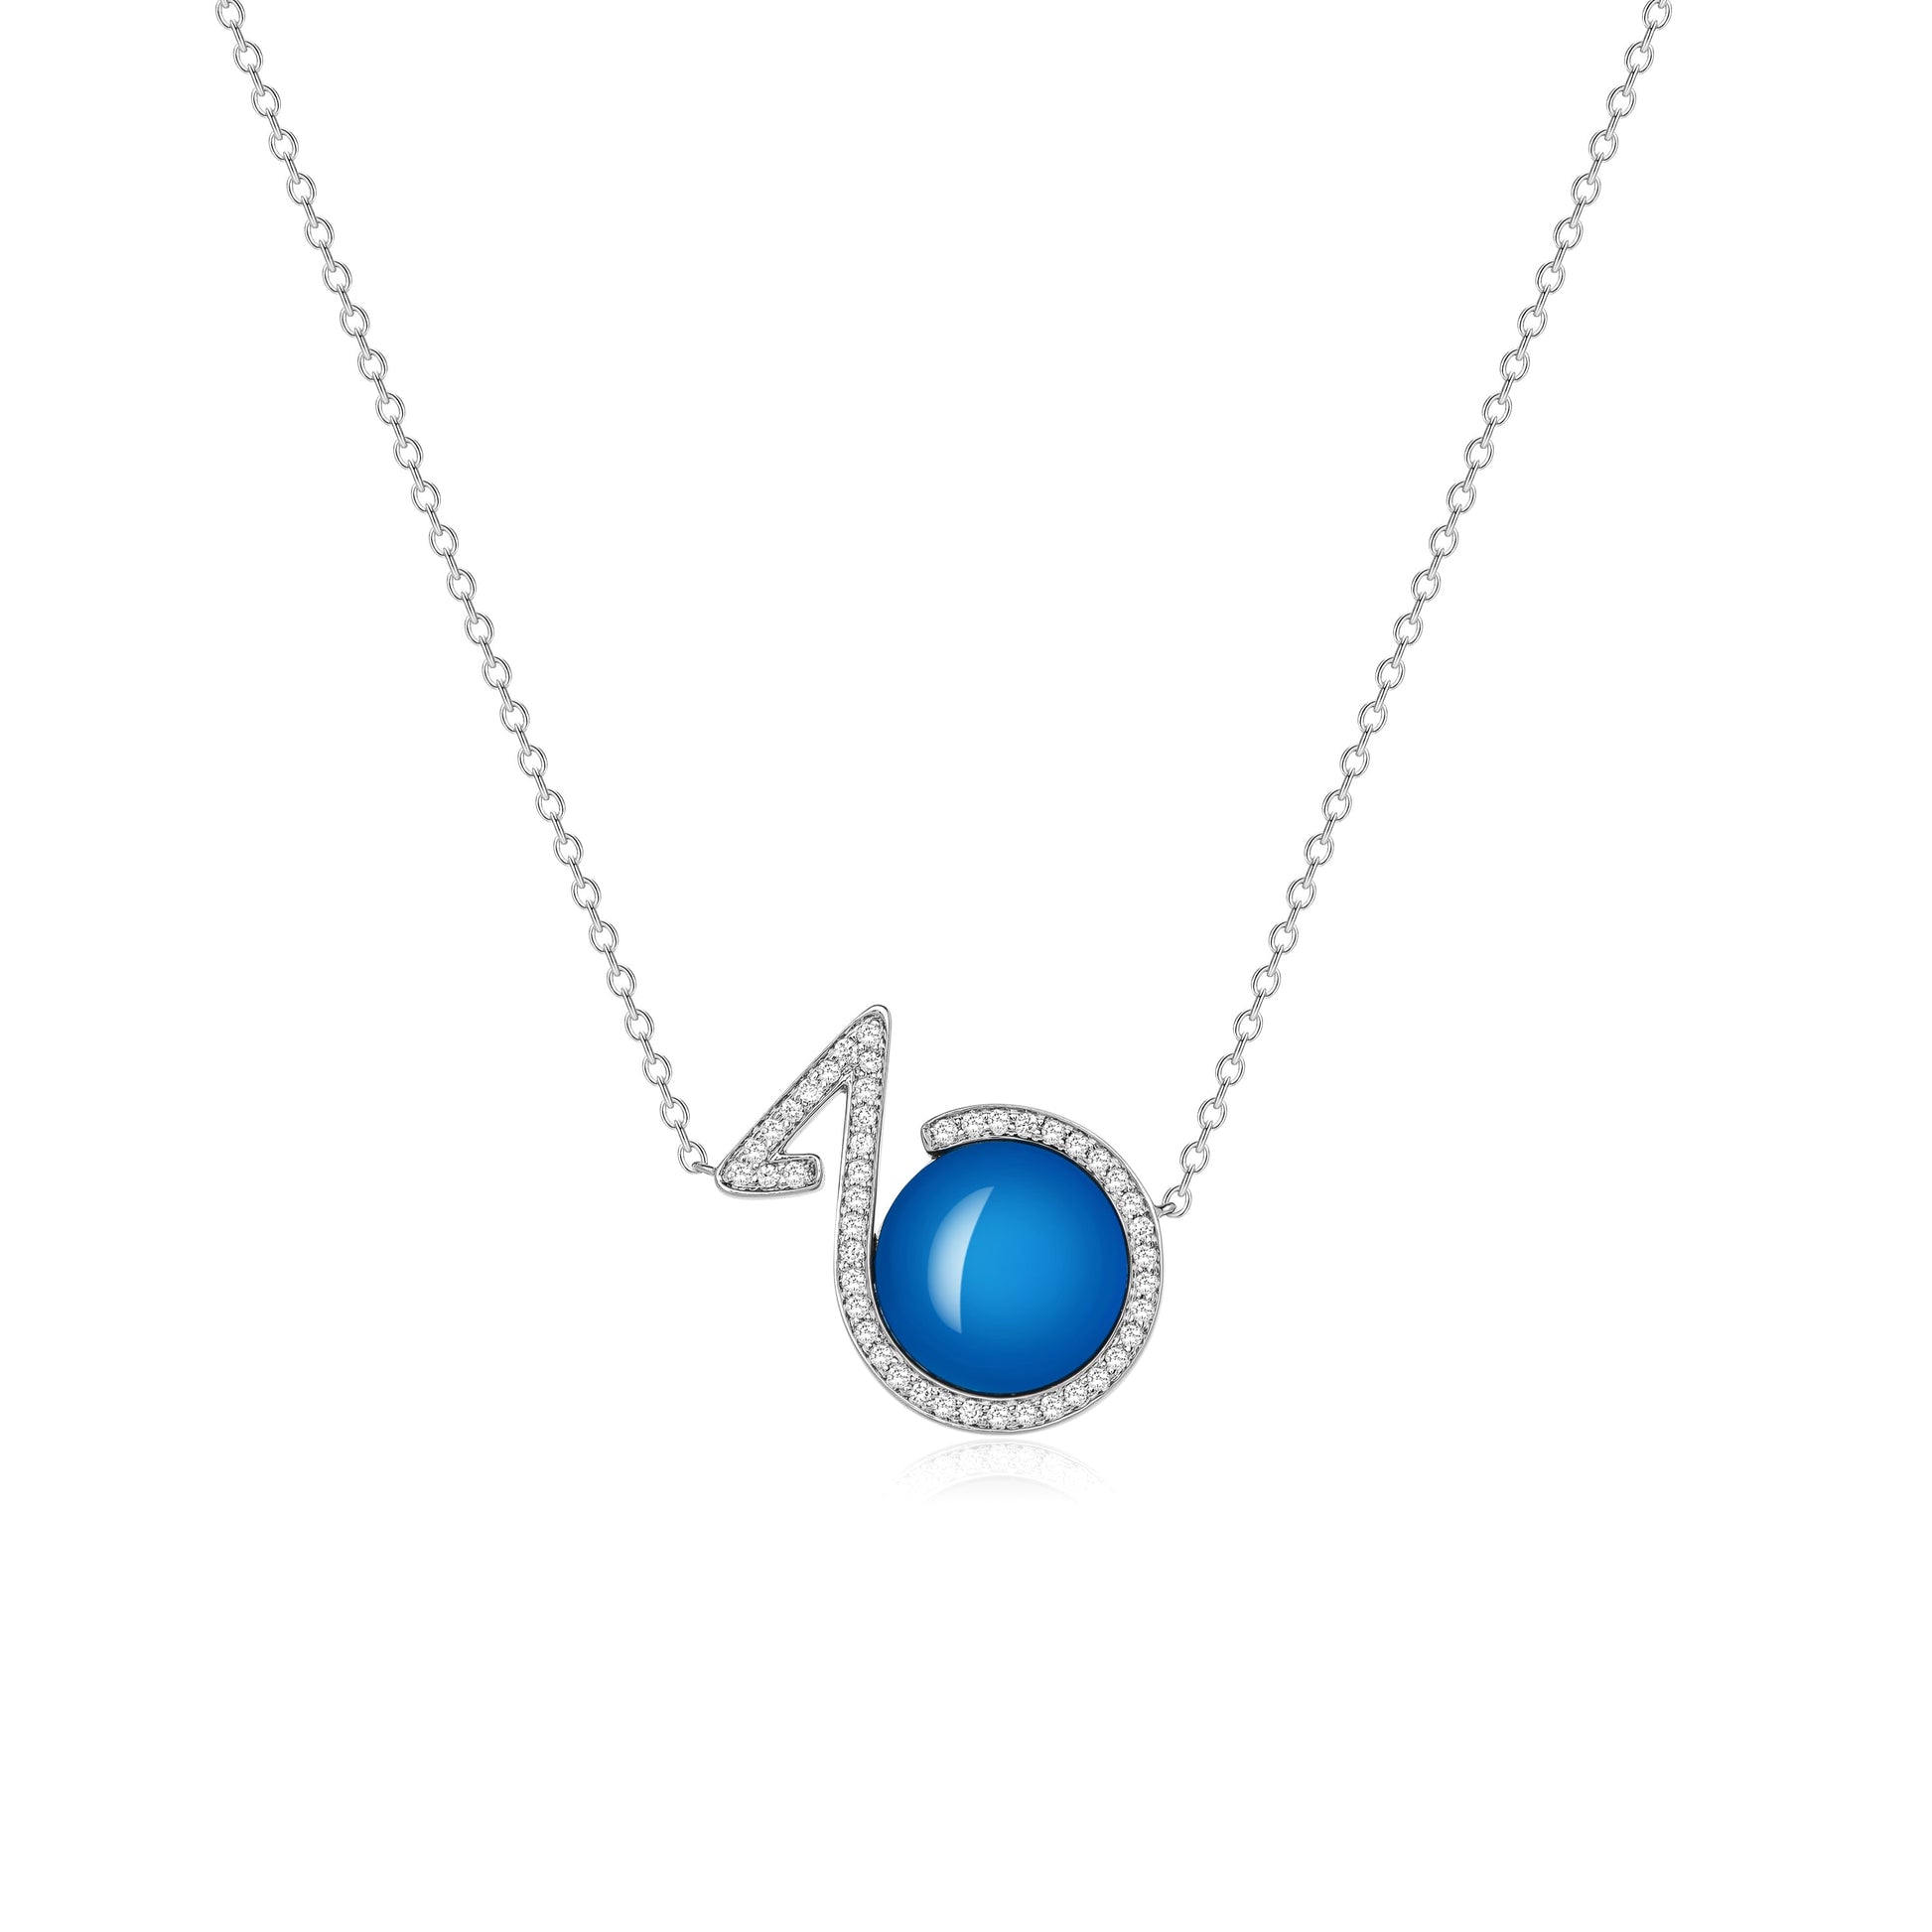 18K White Gold Necklace With Blue Agate And Diamonds